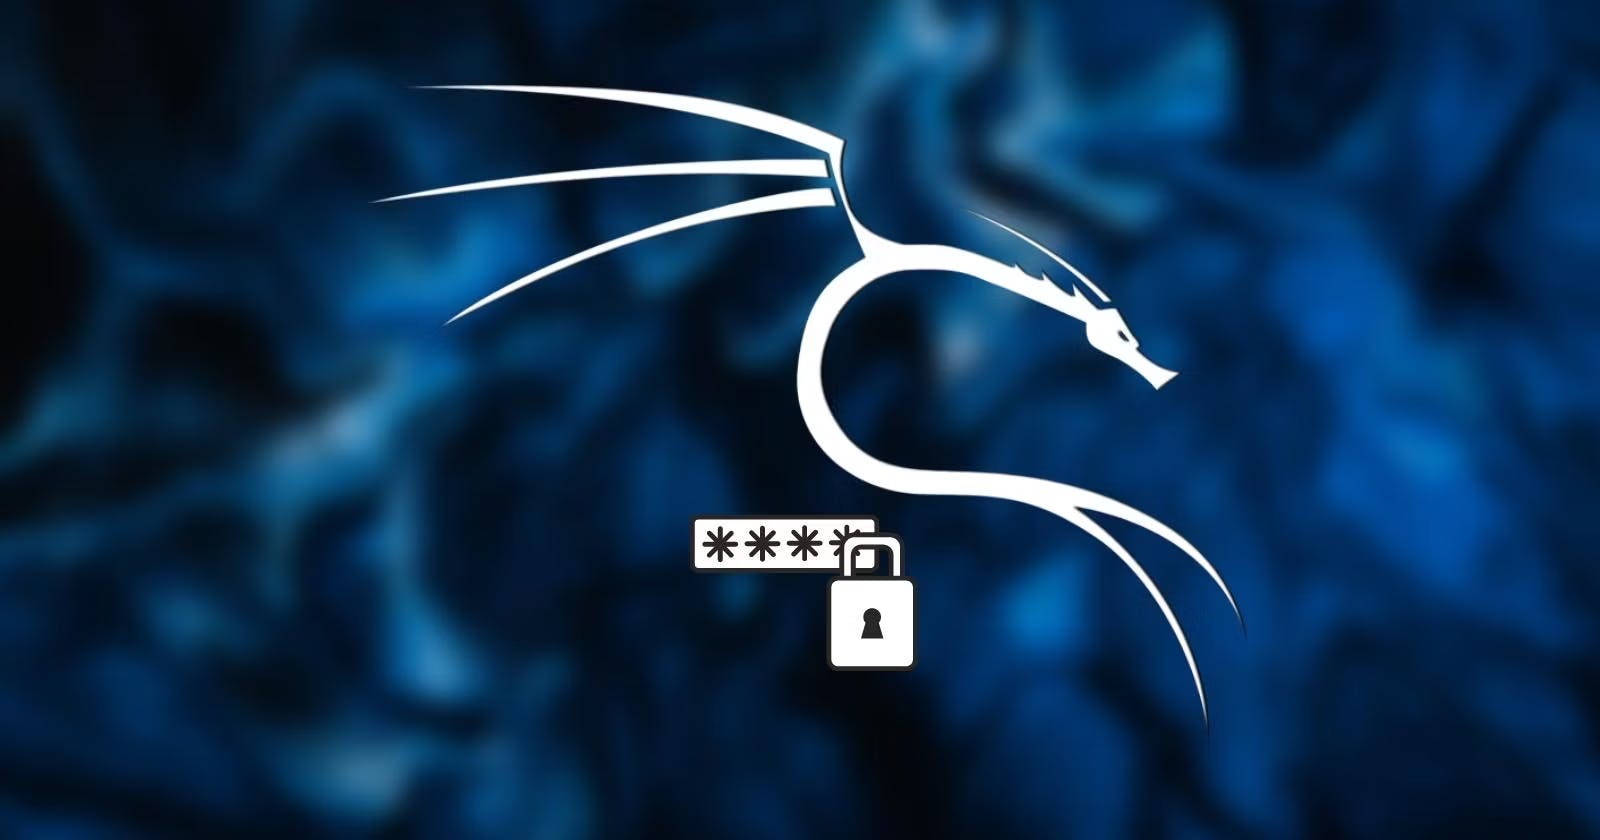 Step-by-step instructions on enabling the root user on Kali Linux